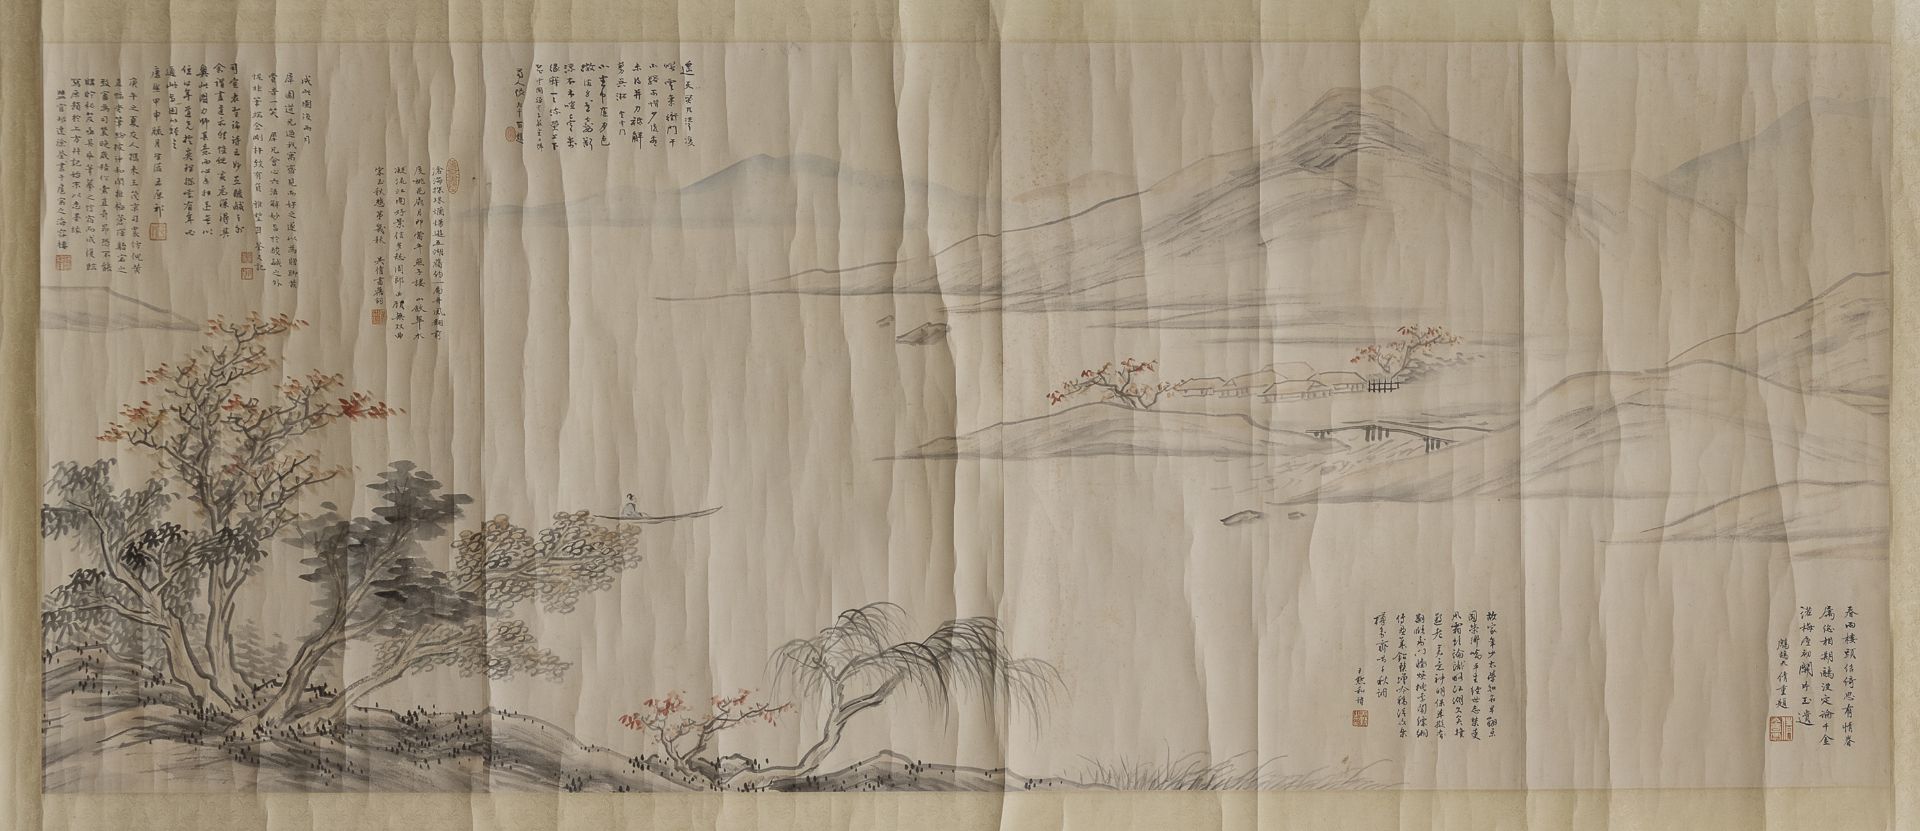 A CHINESE MIXED MEDIA LANDSCAPE ON PAPER 20TH CENTURY.